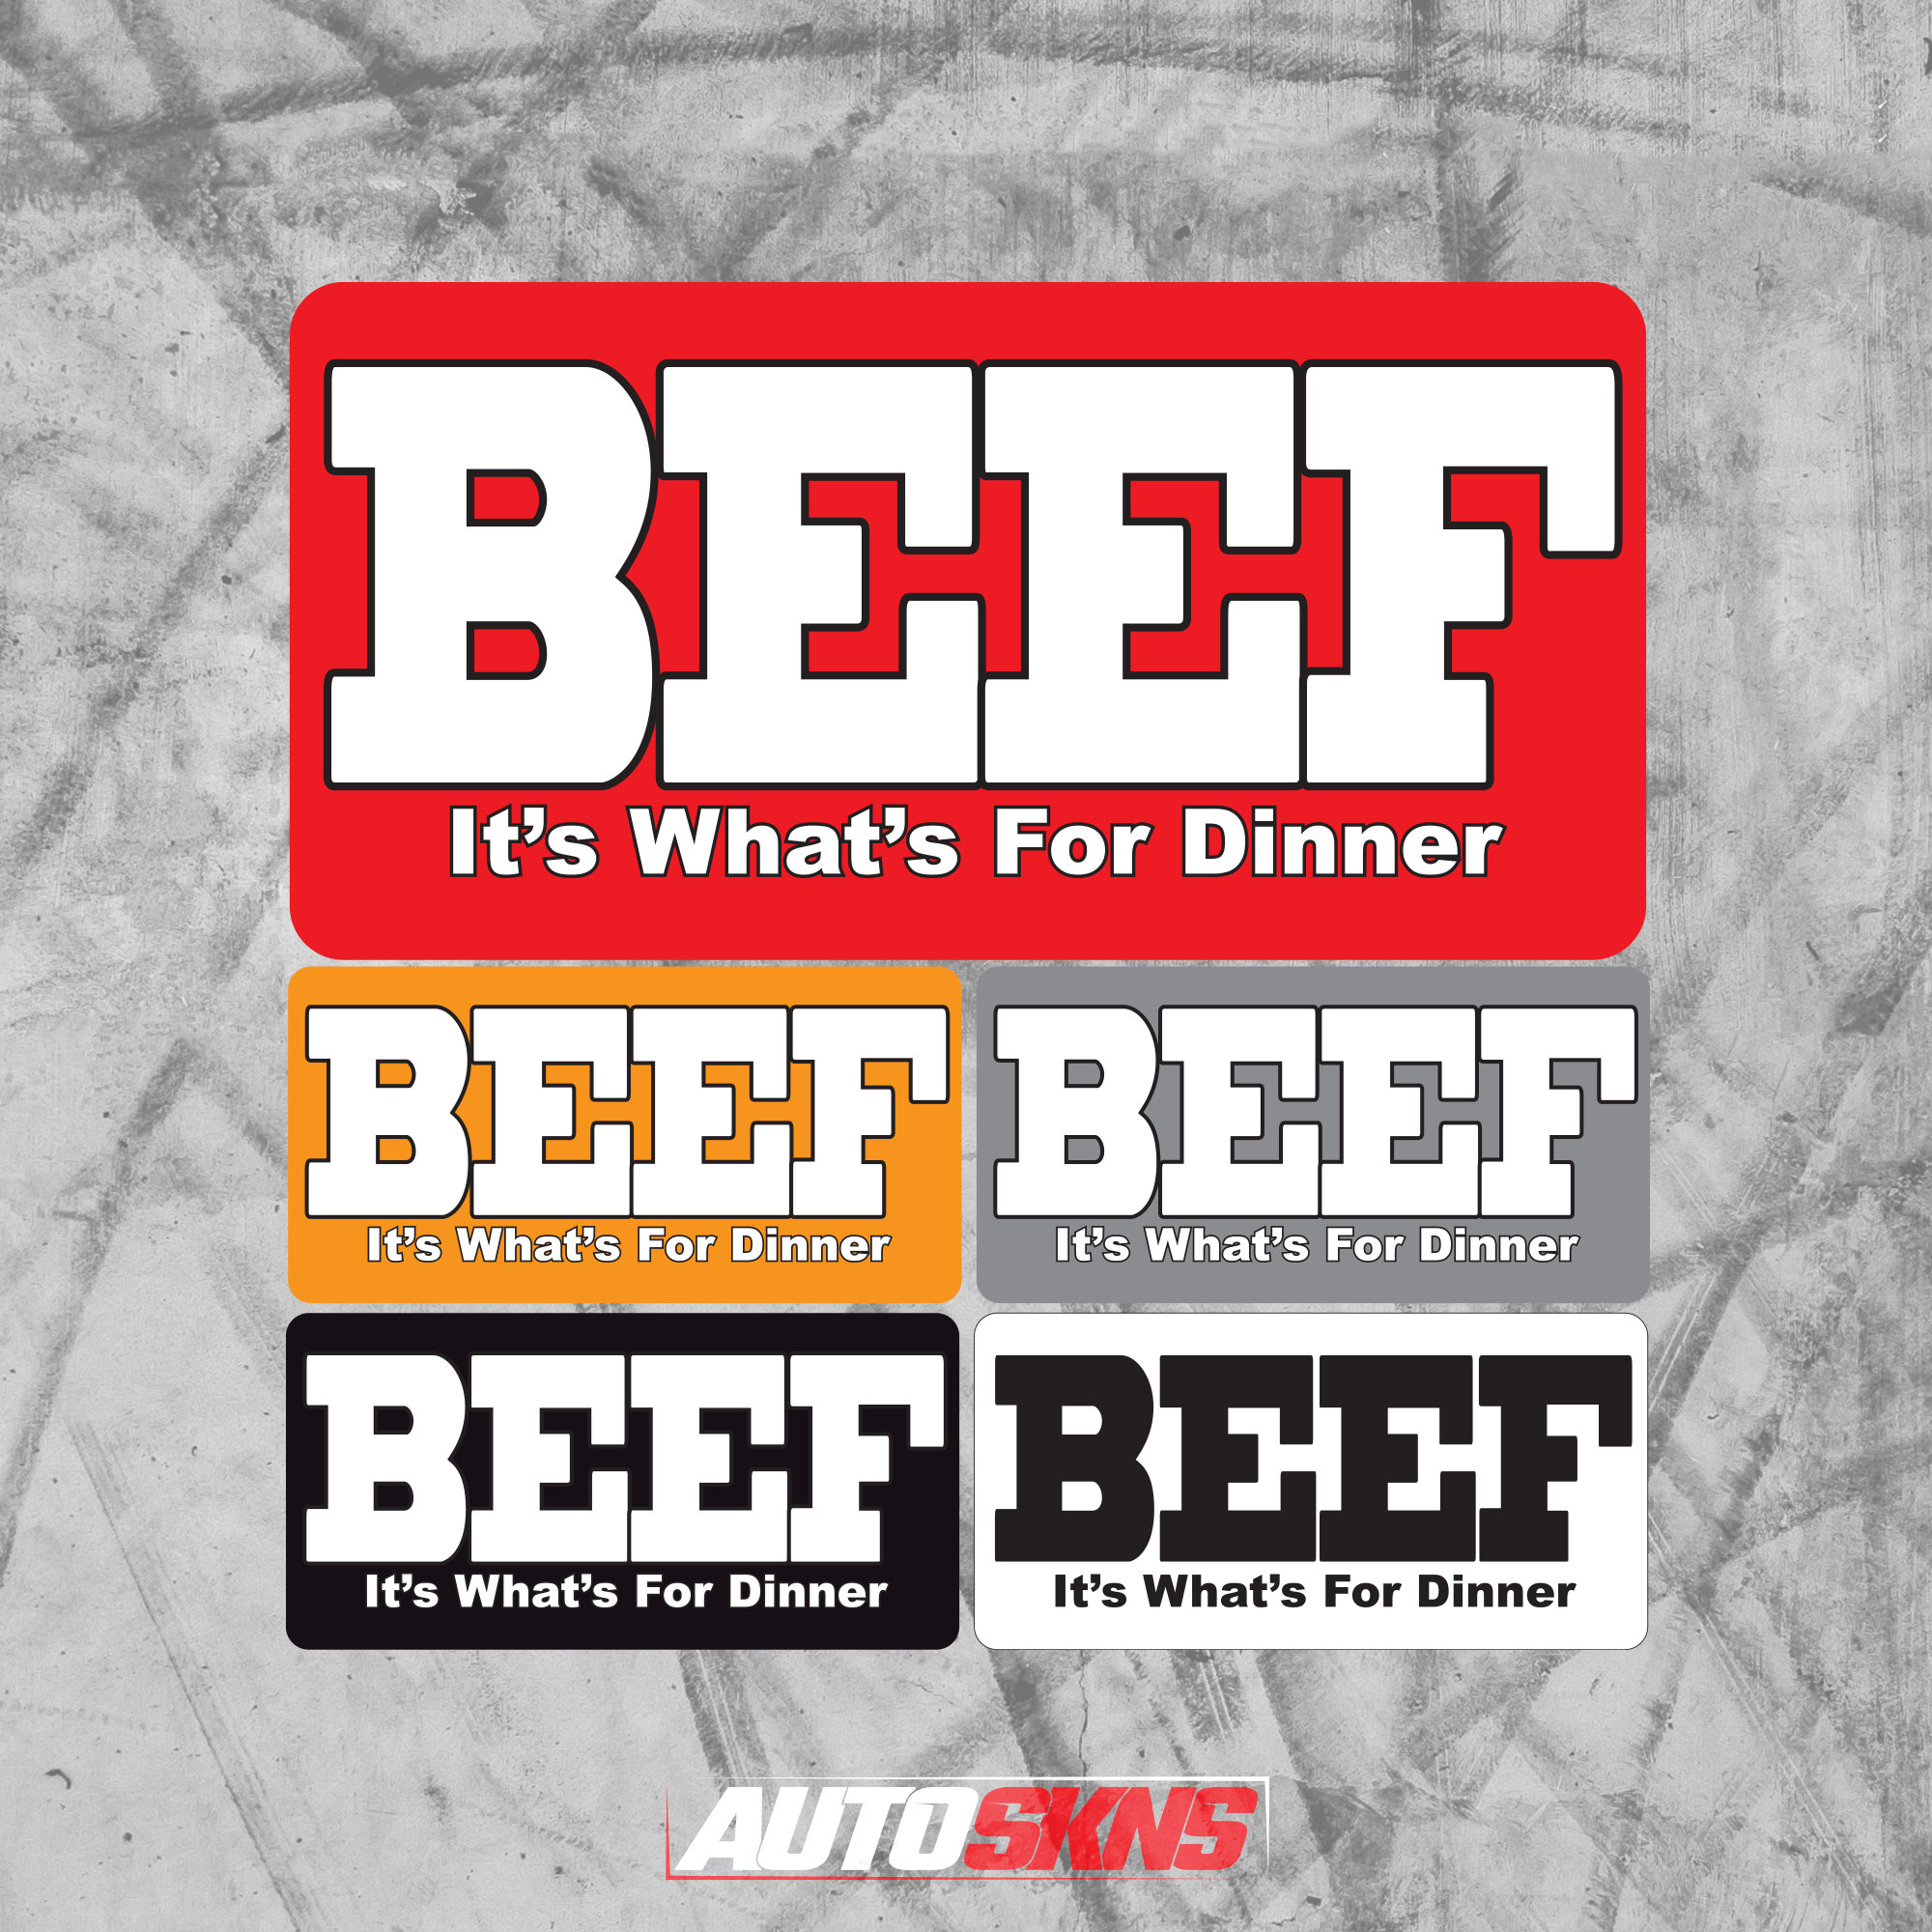 Beef Its what's for Dinner Bumper Sticker 